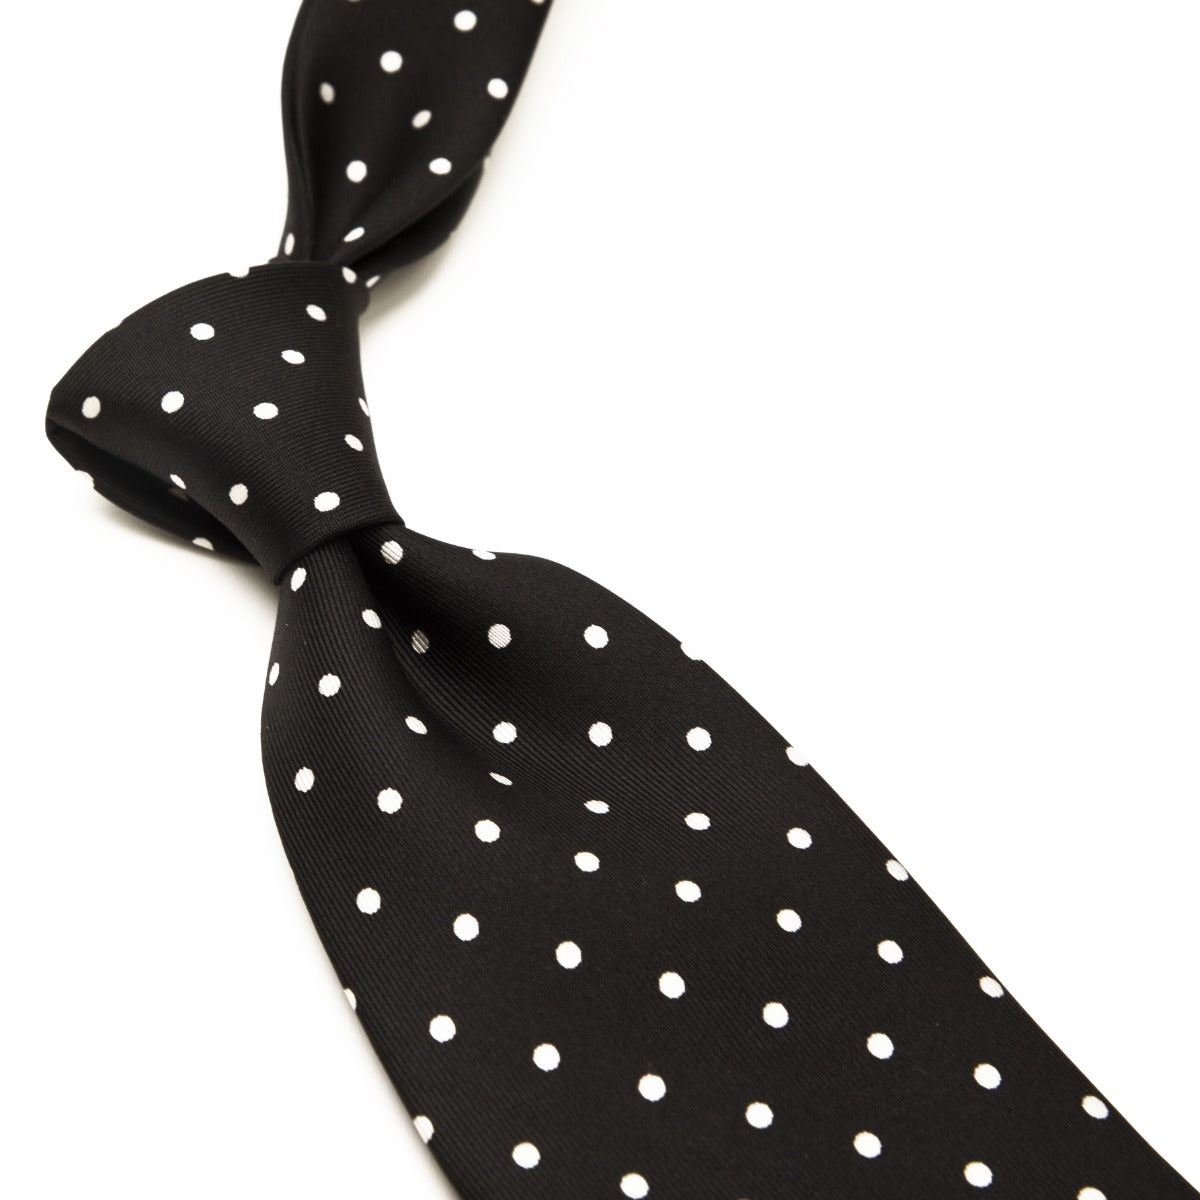 A Sovereign Grade Black/White 36oz London Dot tie from KirbyAllison.com on a white background.